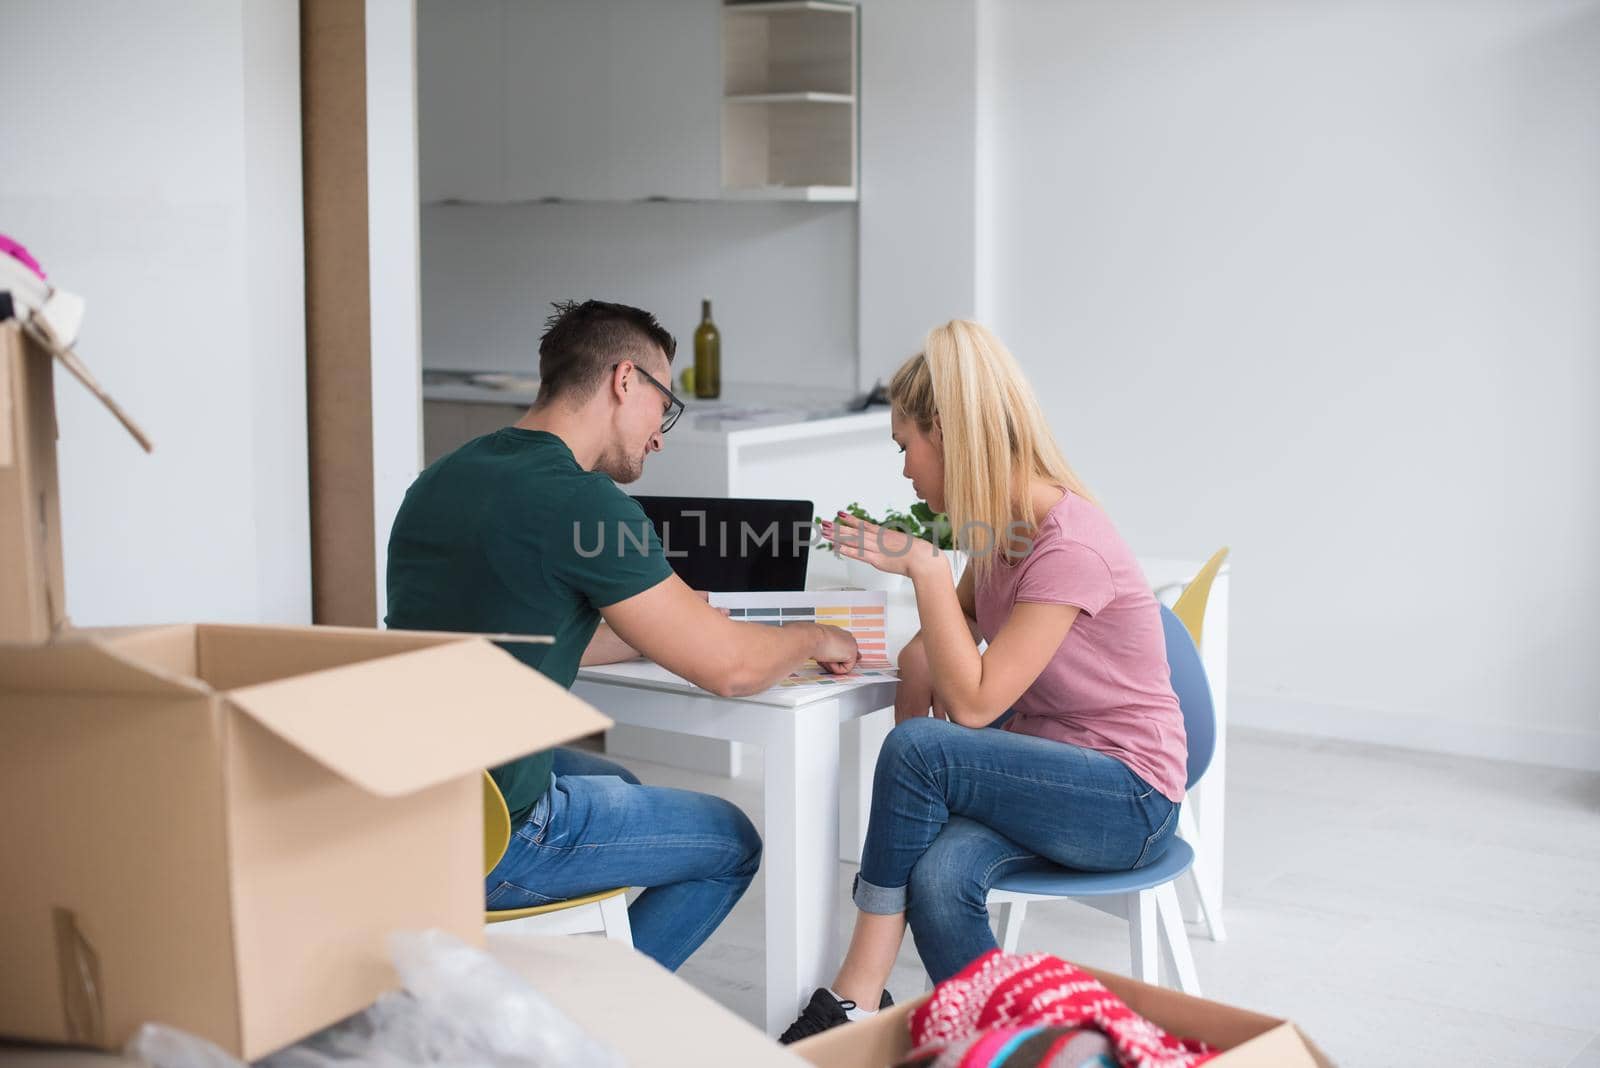 Young couple moving in a new home. Man and woman at the table using notebook laptop computer and plans with boxes around them